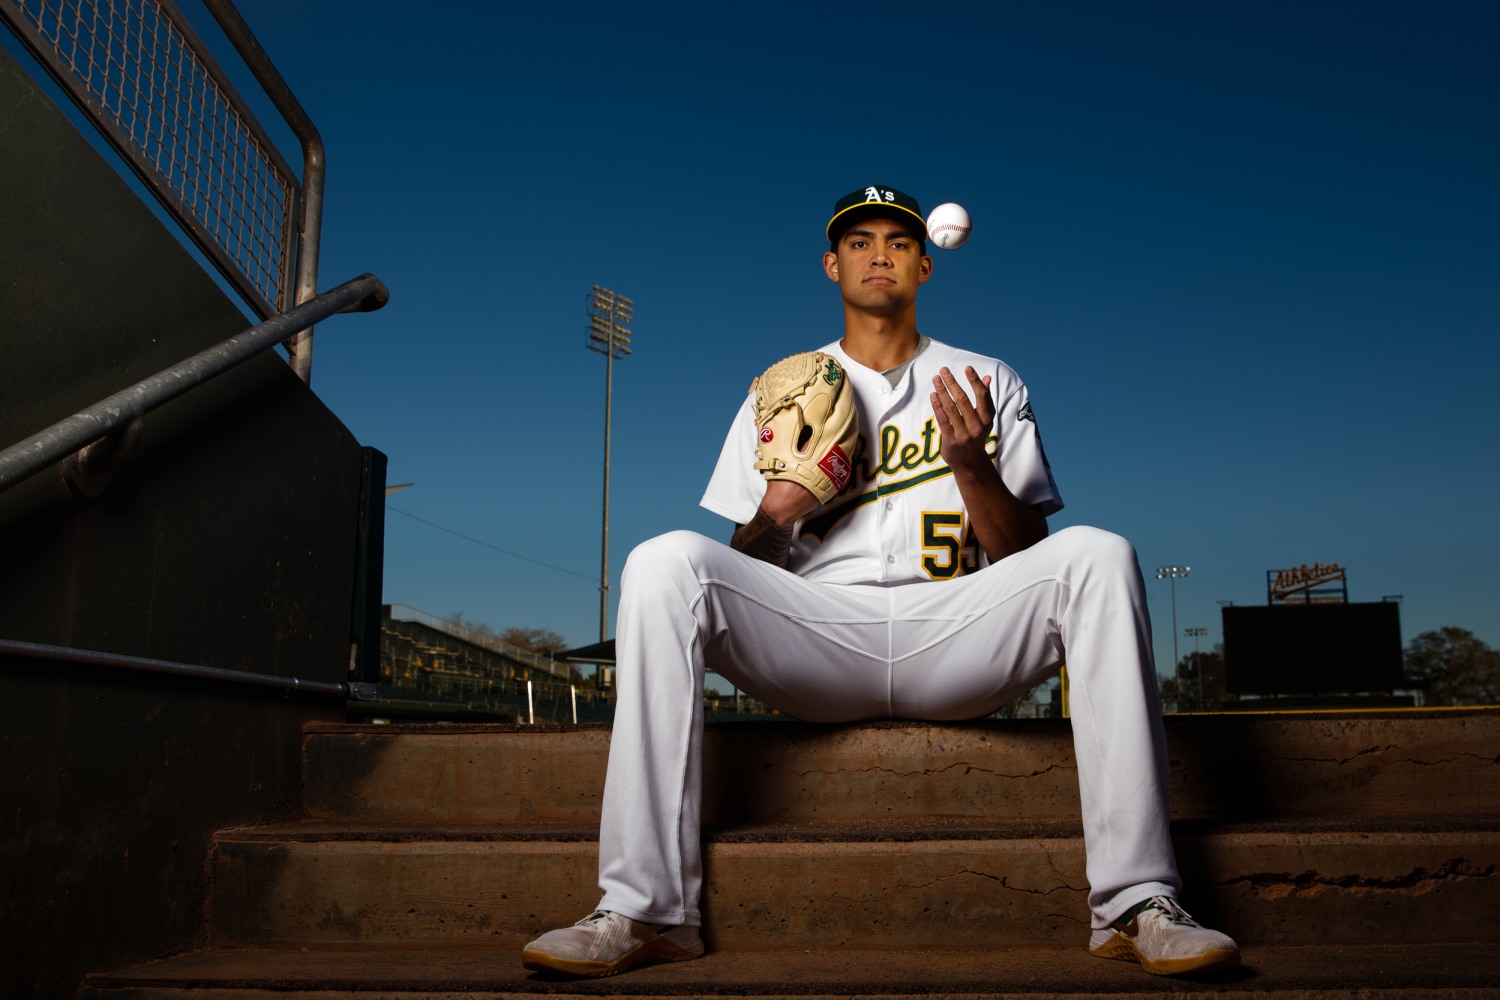 Andrean grad Sean Manaea steps up at the plate for Athletics